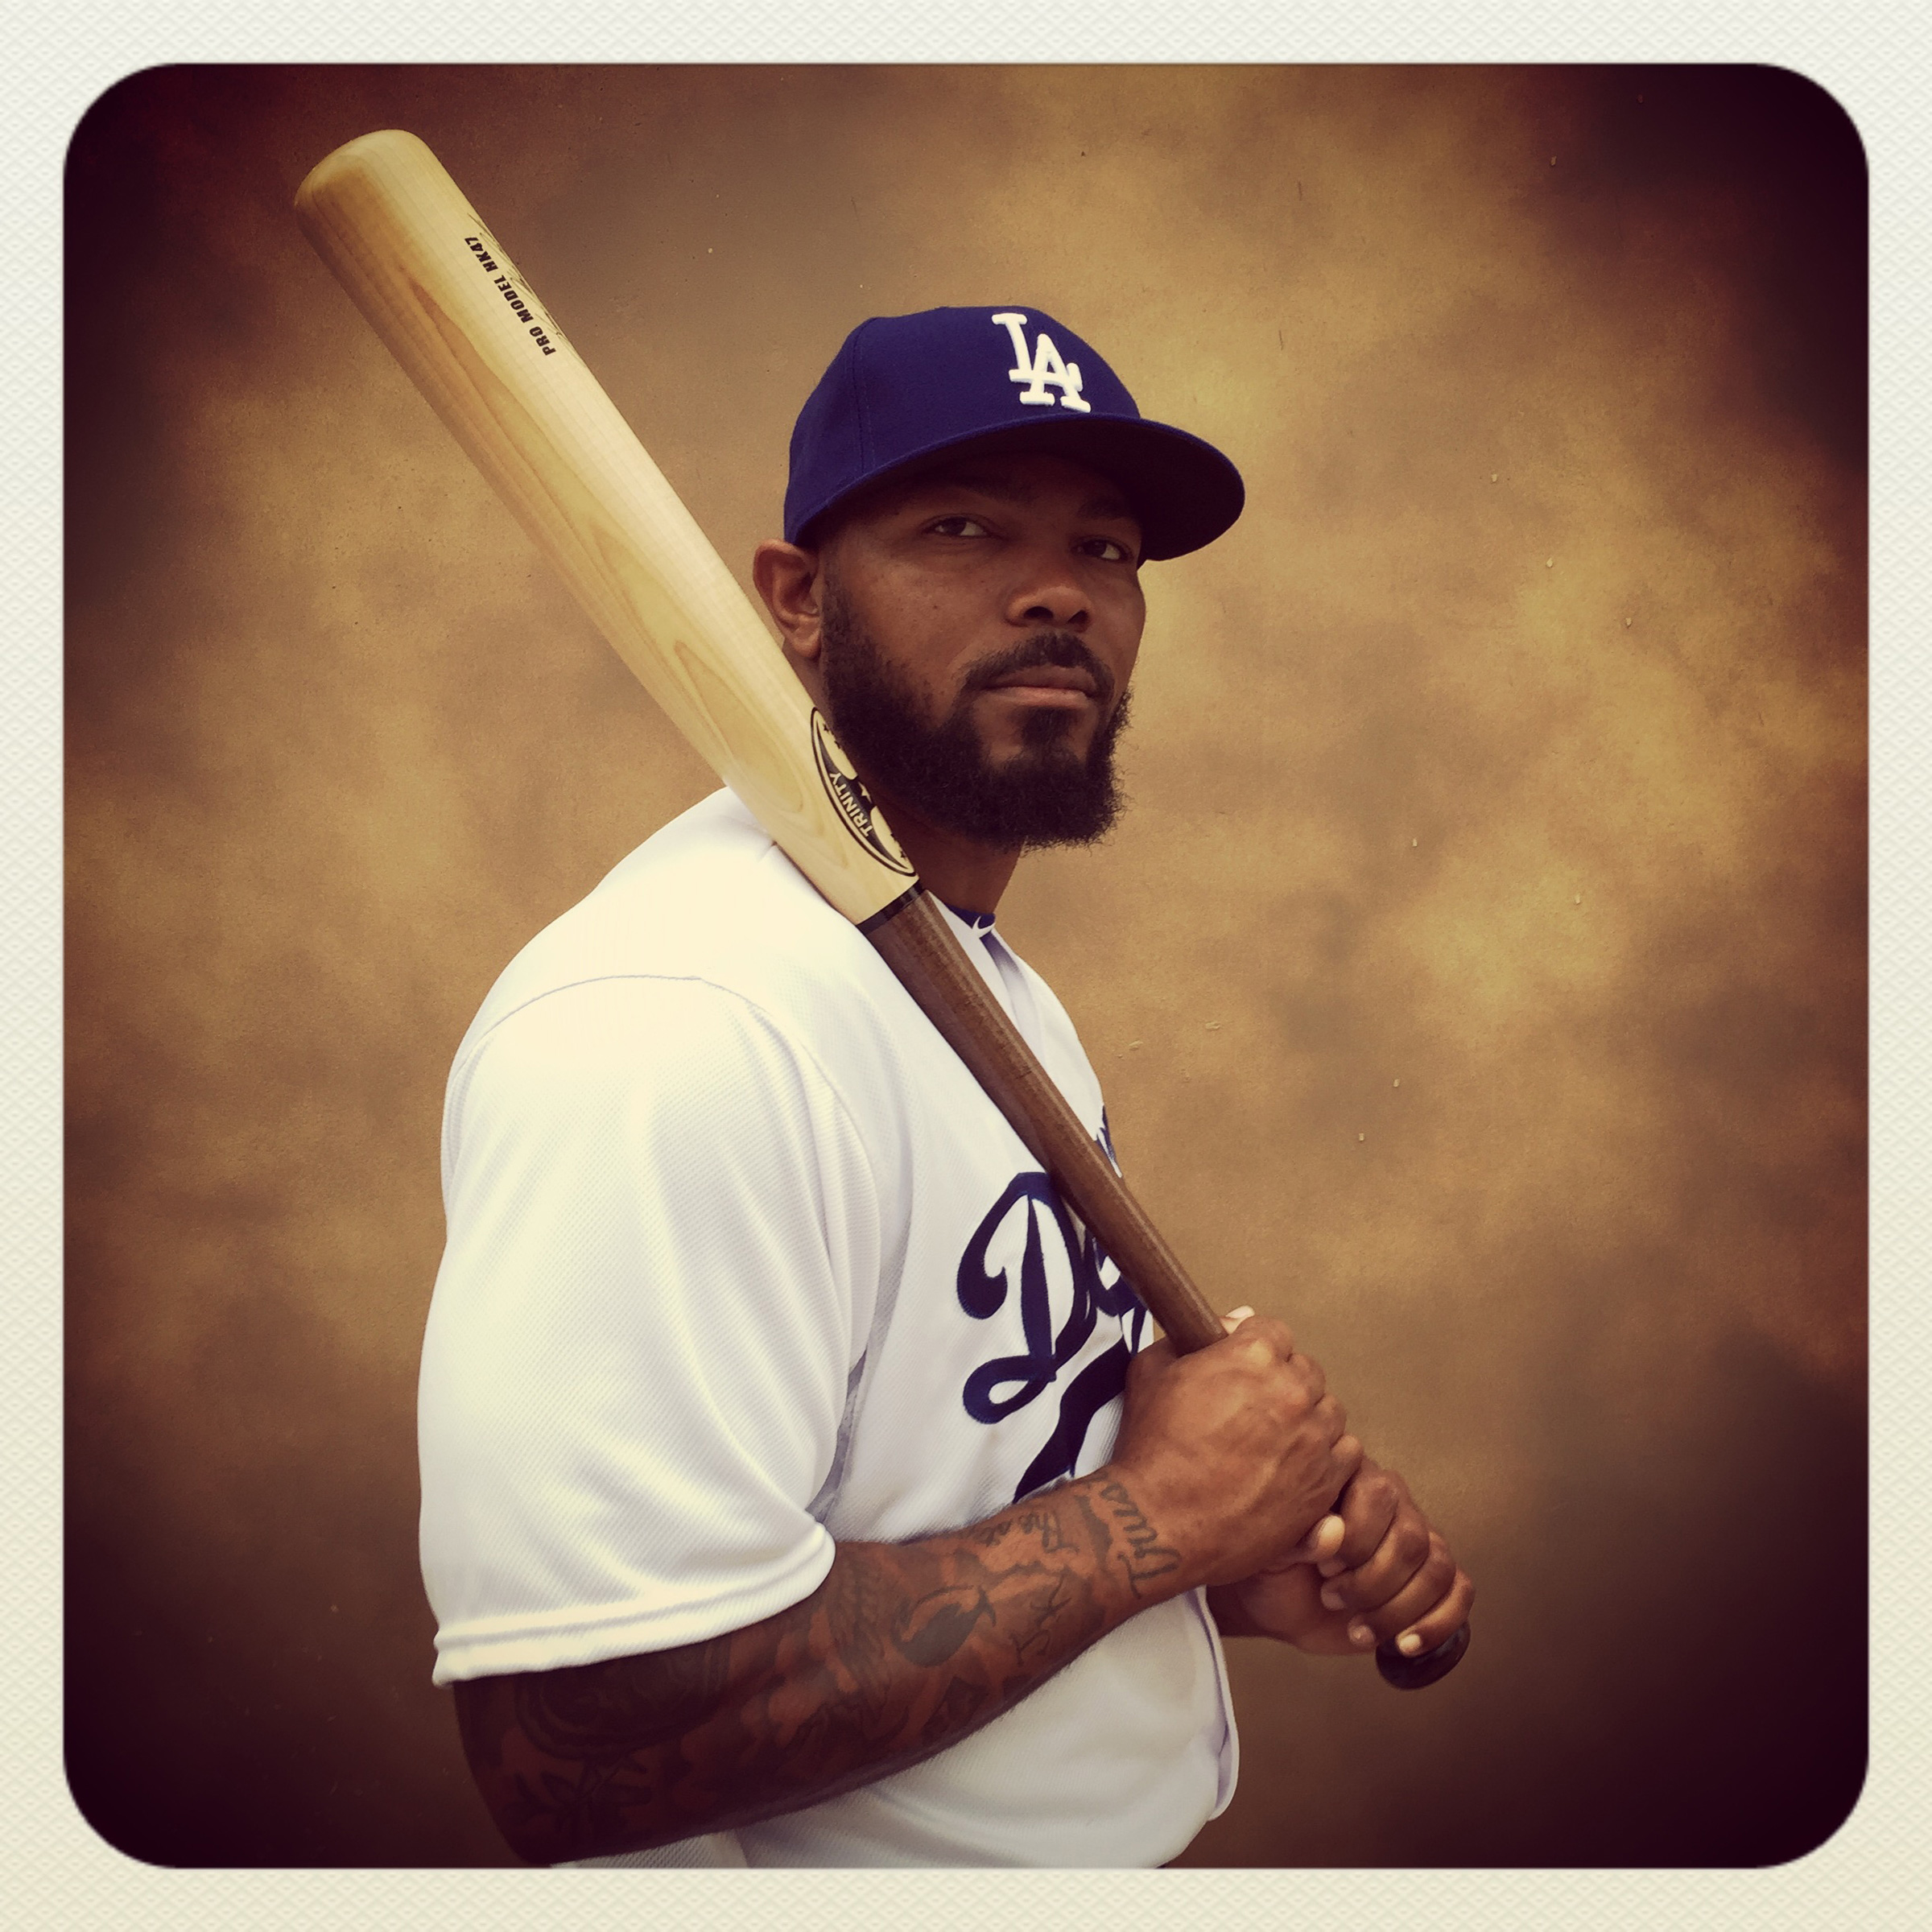 #dodgers second baseman Howie Kendrick poses for a portrait on photo day at #springtraining in Glendale, Arizona this morning. #instantbaseball #iphone6plus